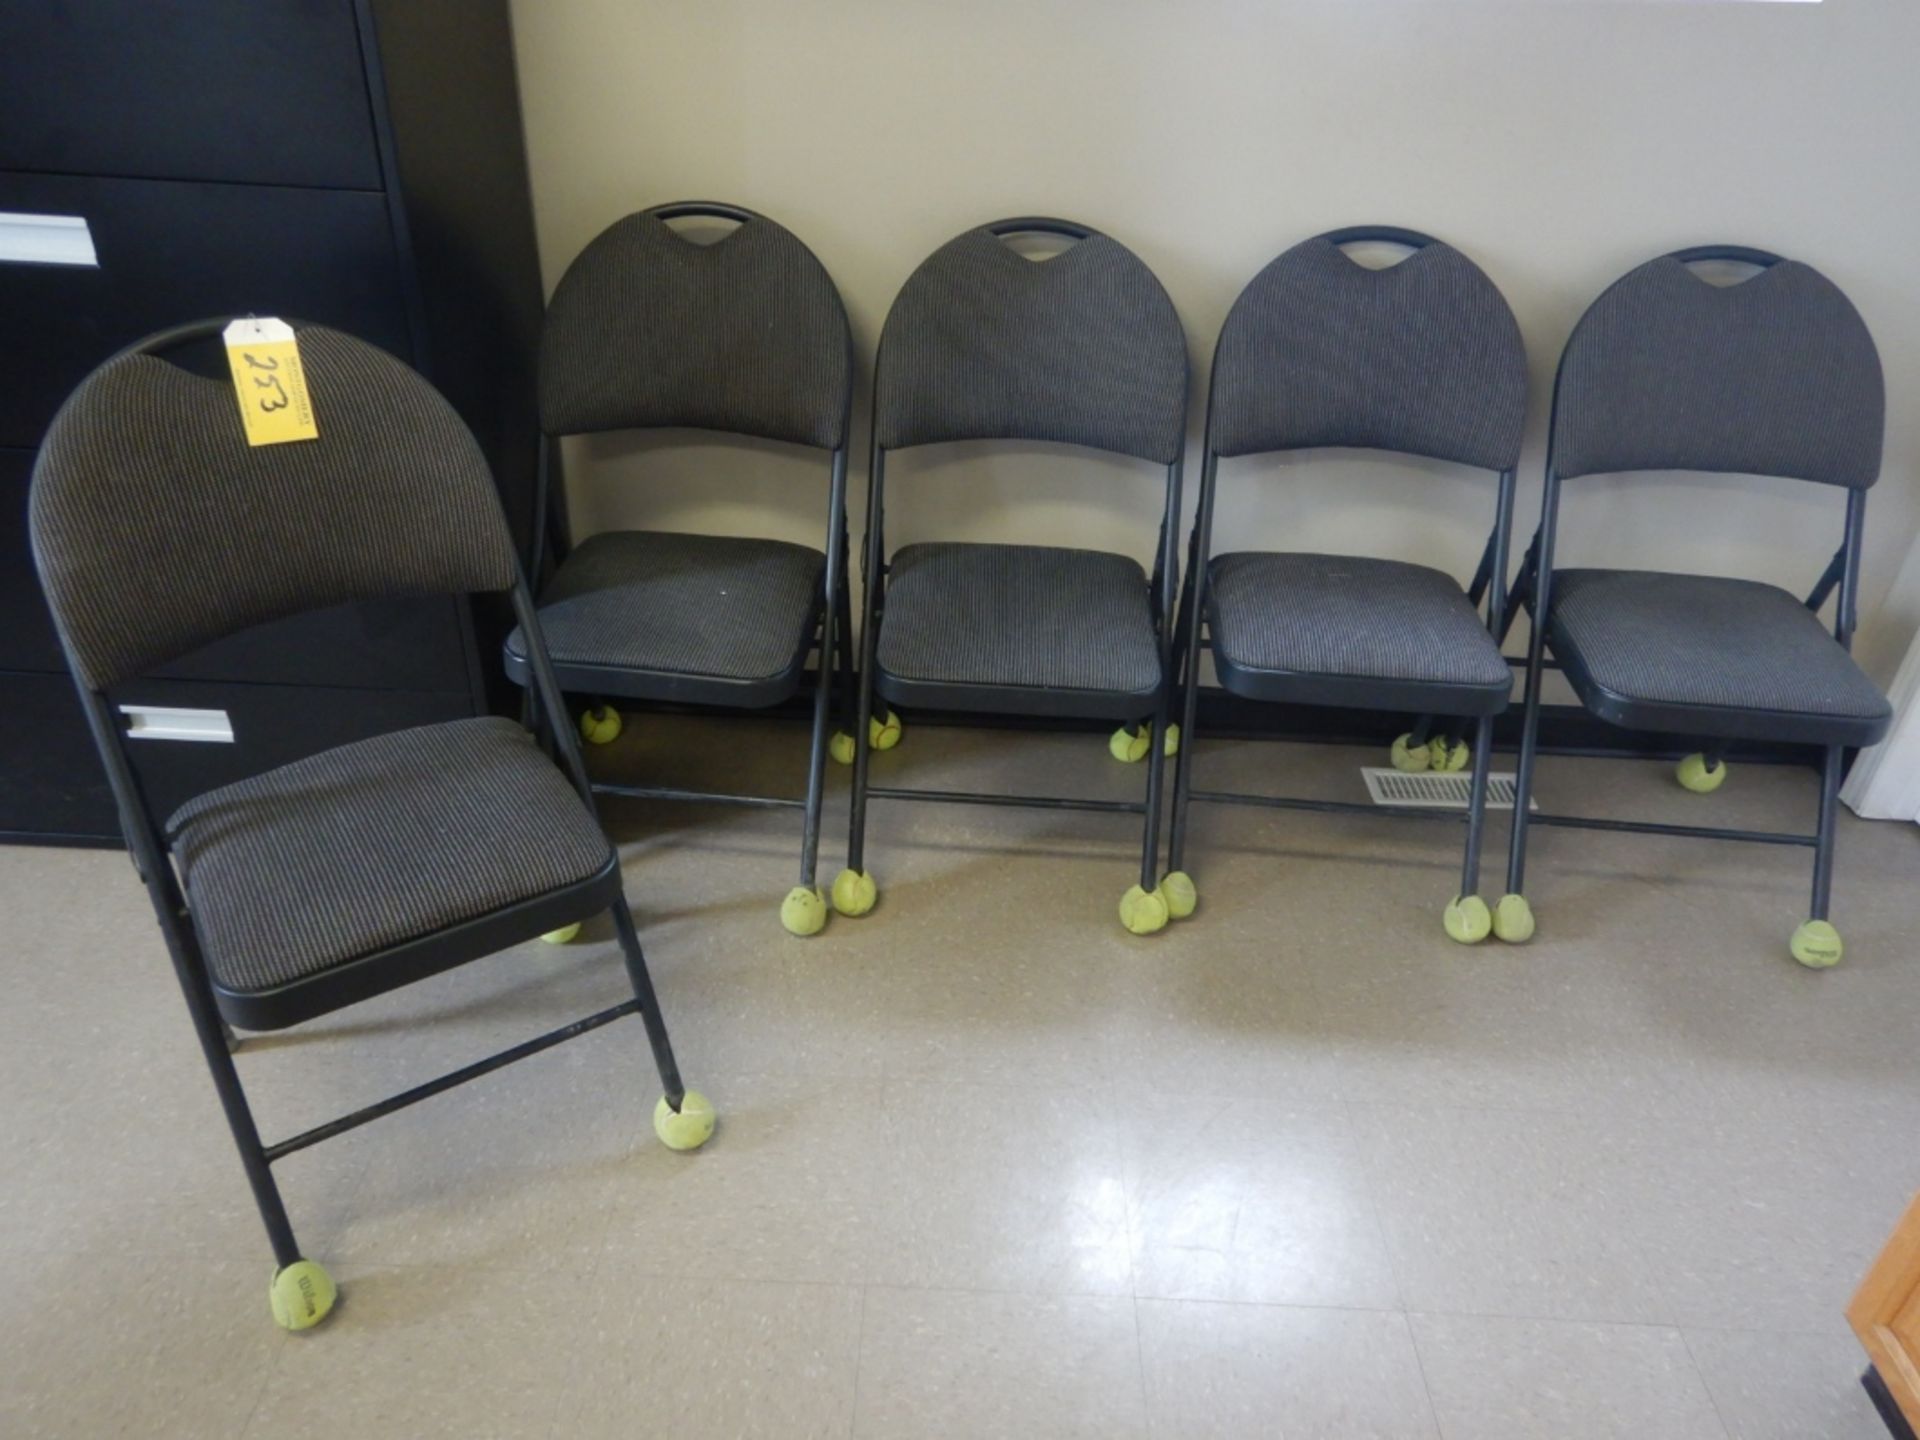 L/O 5 FOLDING CLOTH CHAIRS - Image 2 of 2